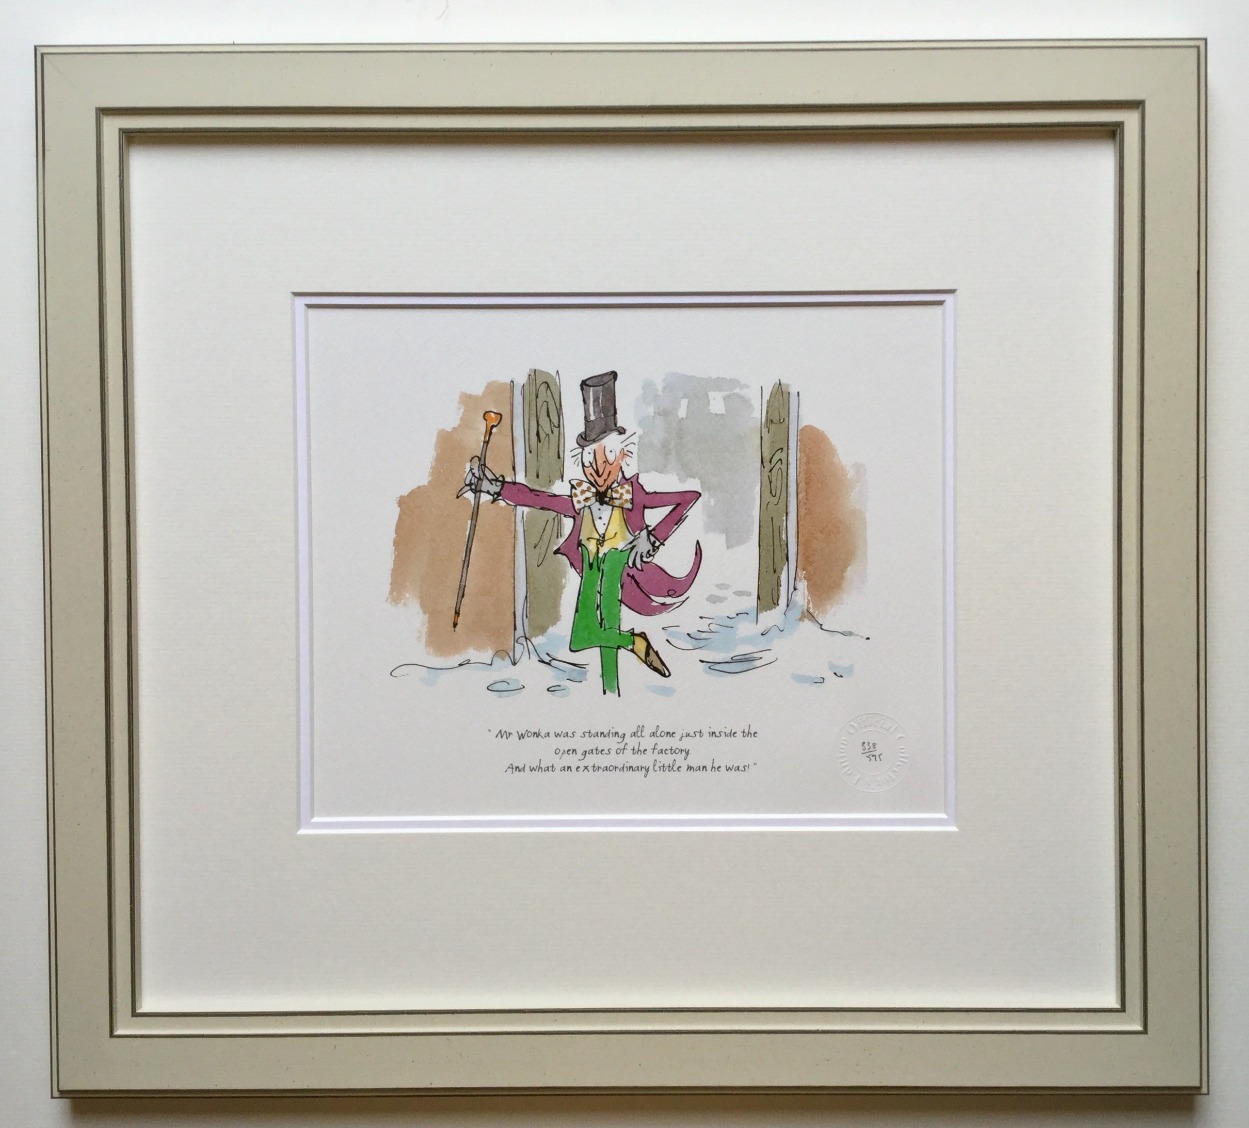 An extraordinary man he was by Quentin Blake, Children | Nostalgic | Illustrative | Willy | Wonka | Chocolate | Charlie | Factory